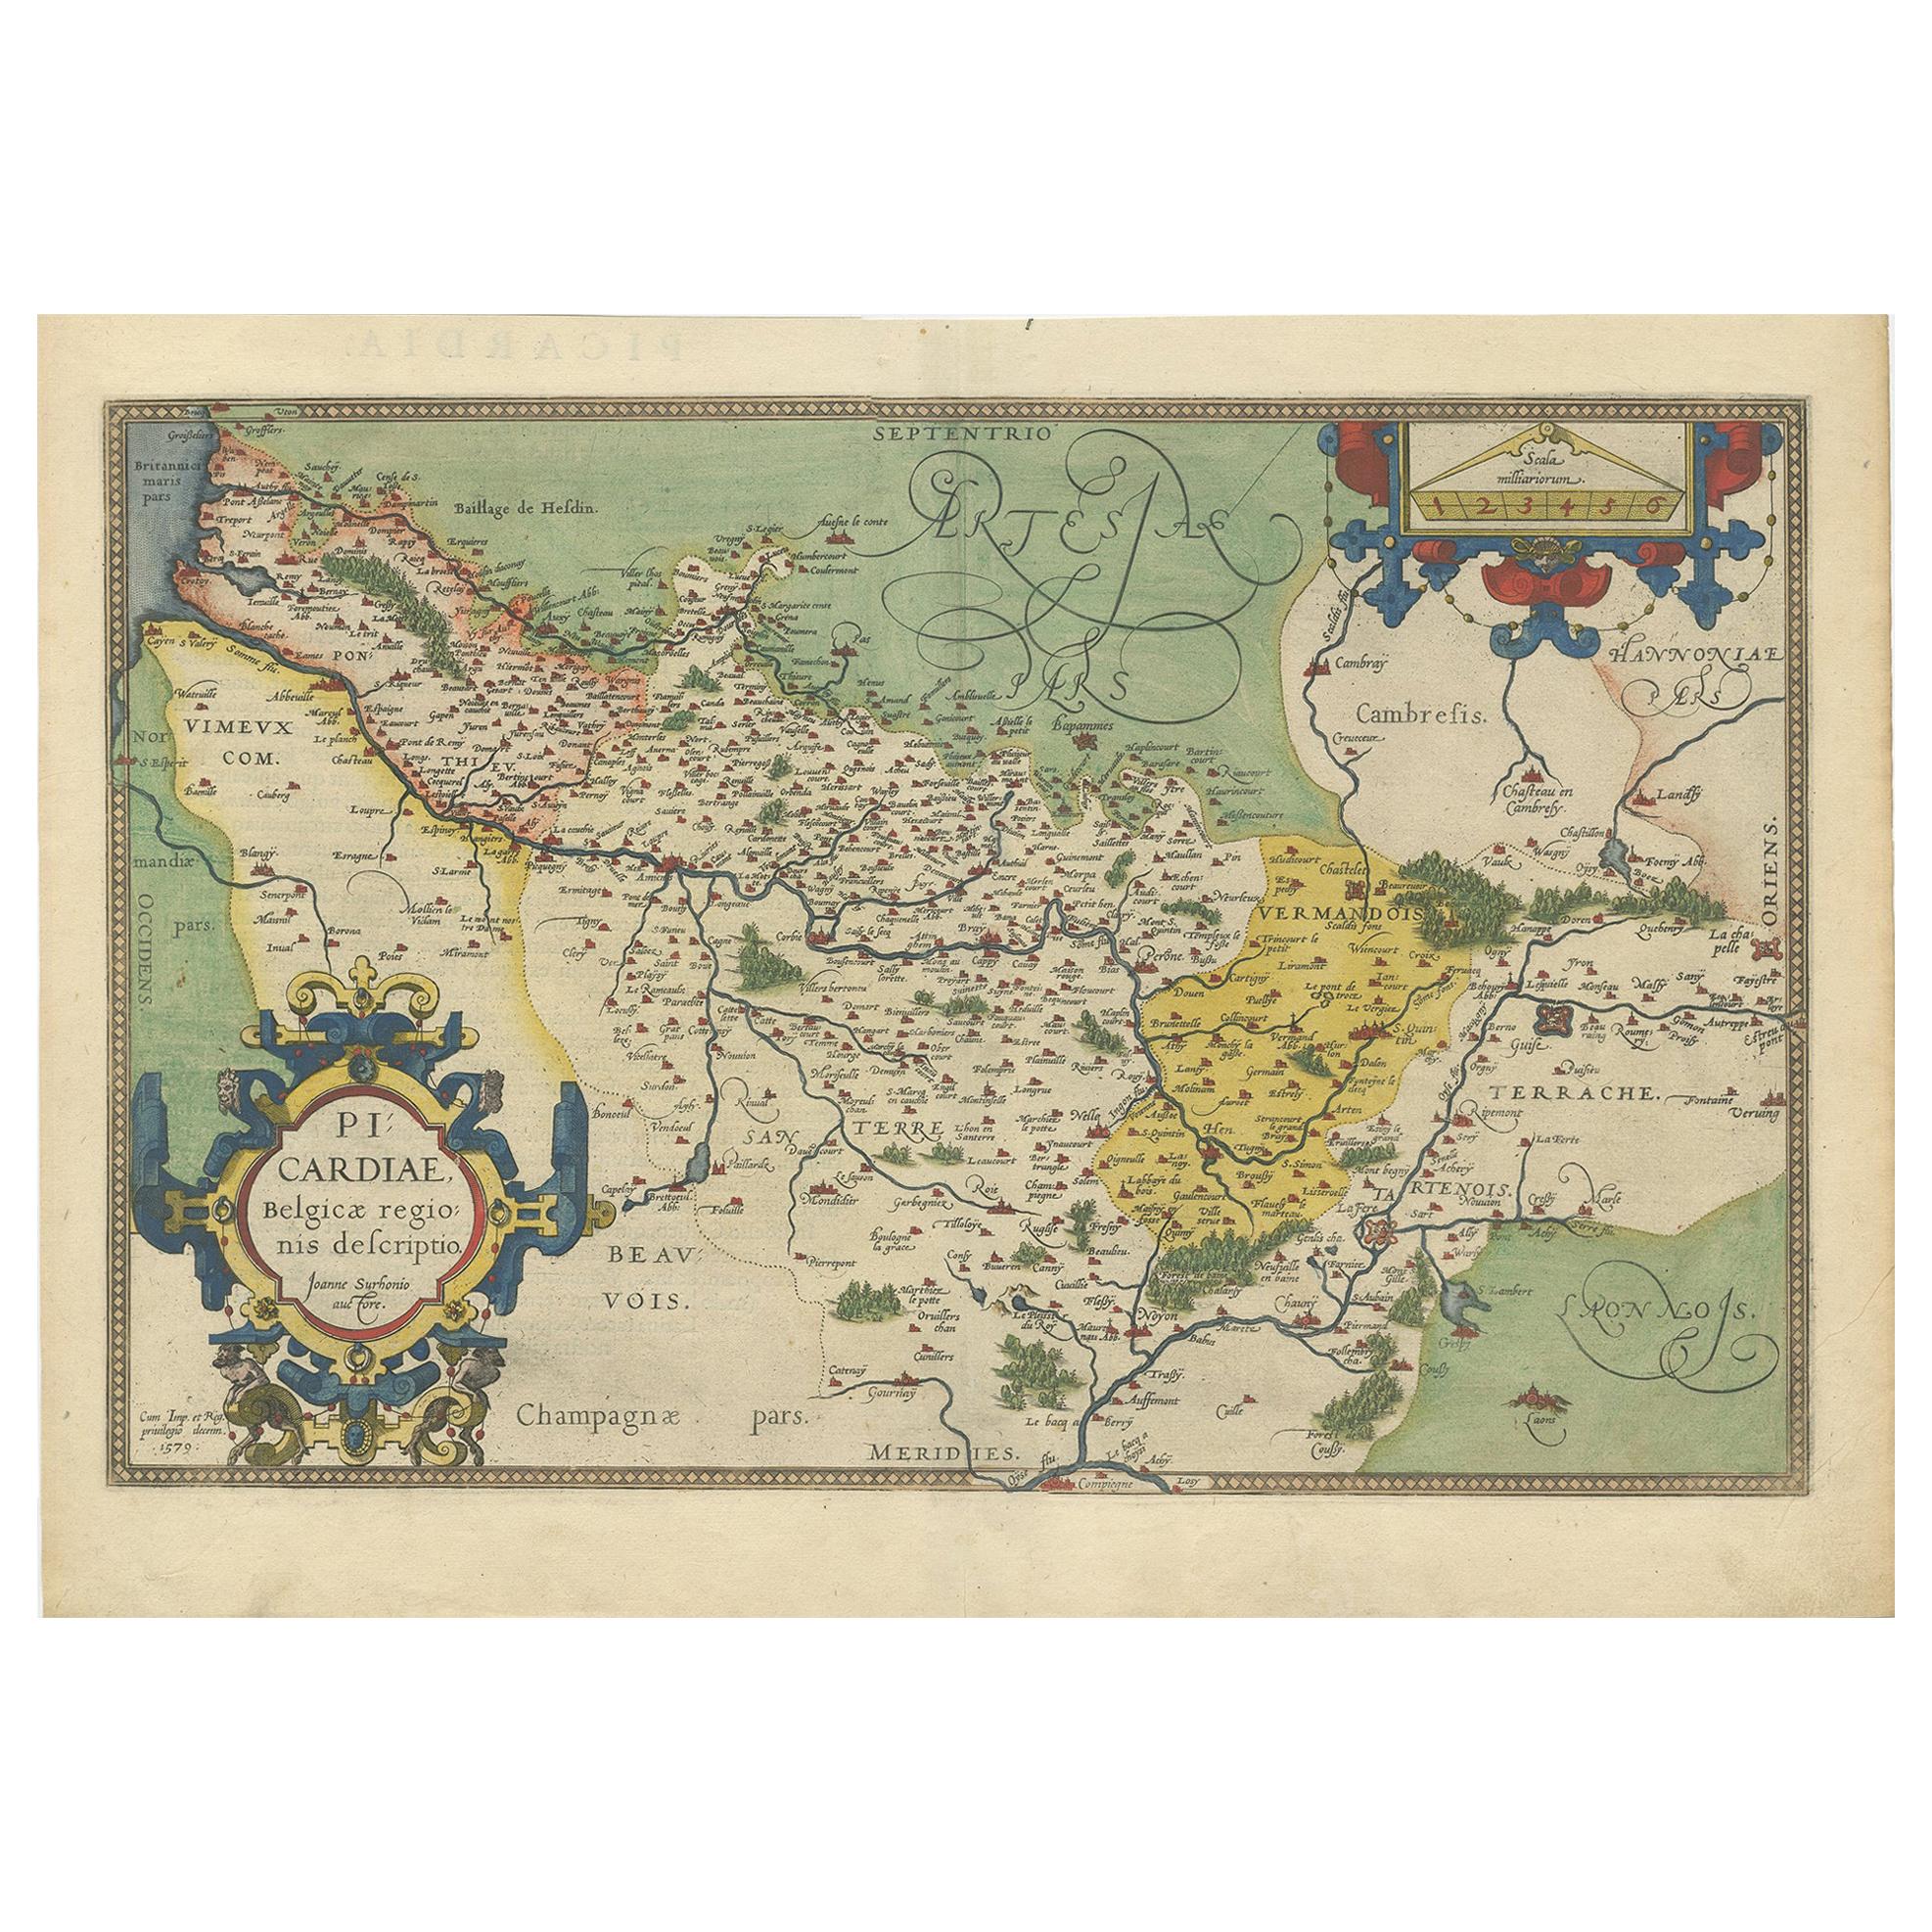 The Antiquity Map of the Picardy Region of France by Ortelius, 'circa 1590' (Carte ancienne de la région Picardie de la France par Ortelius, 'circa 1590')